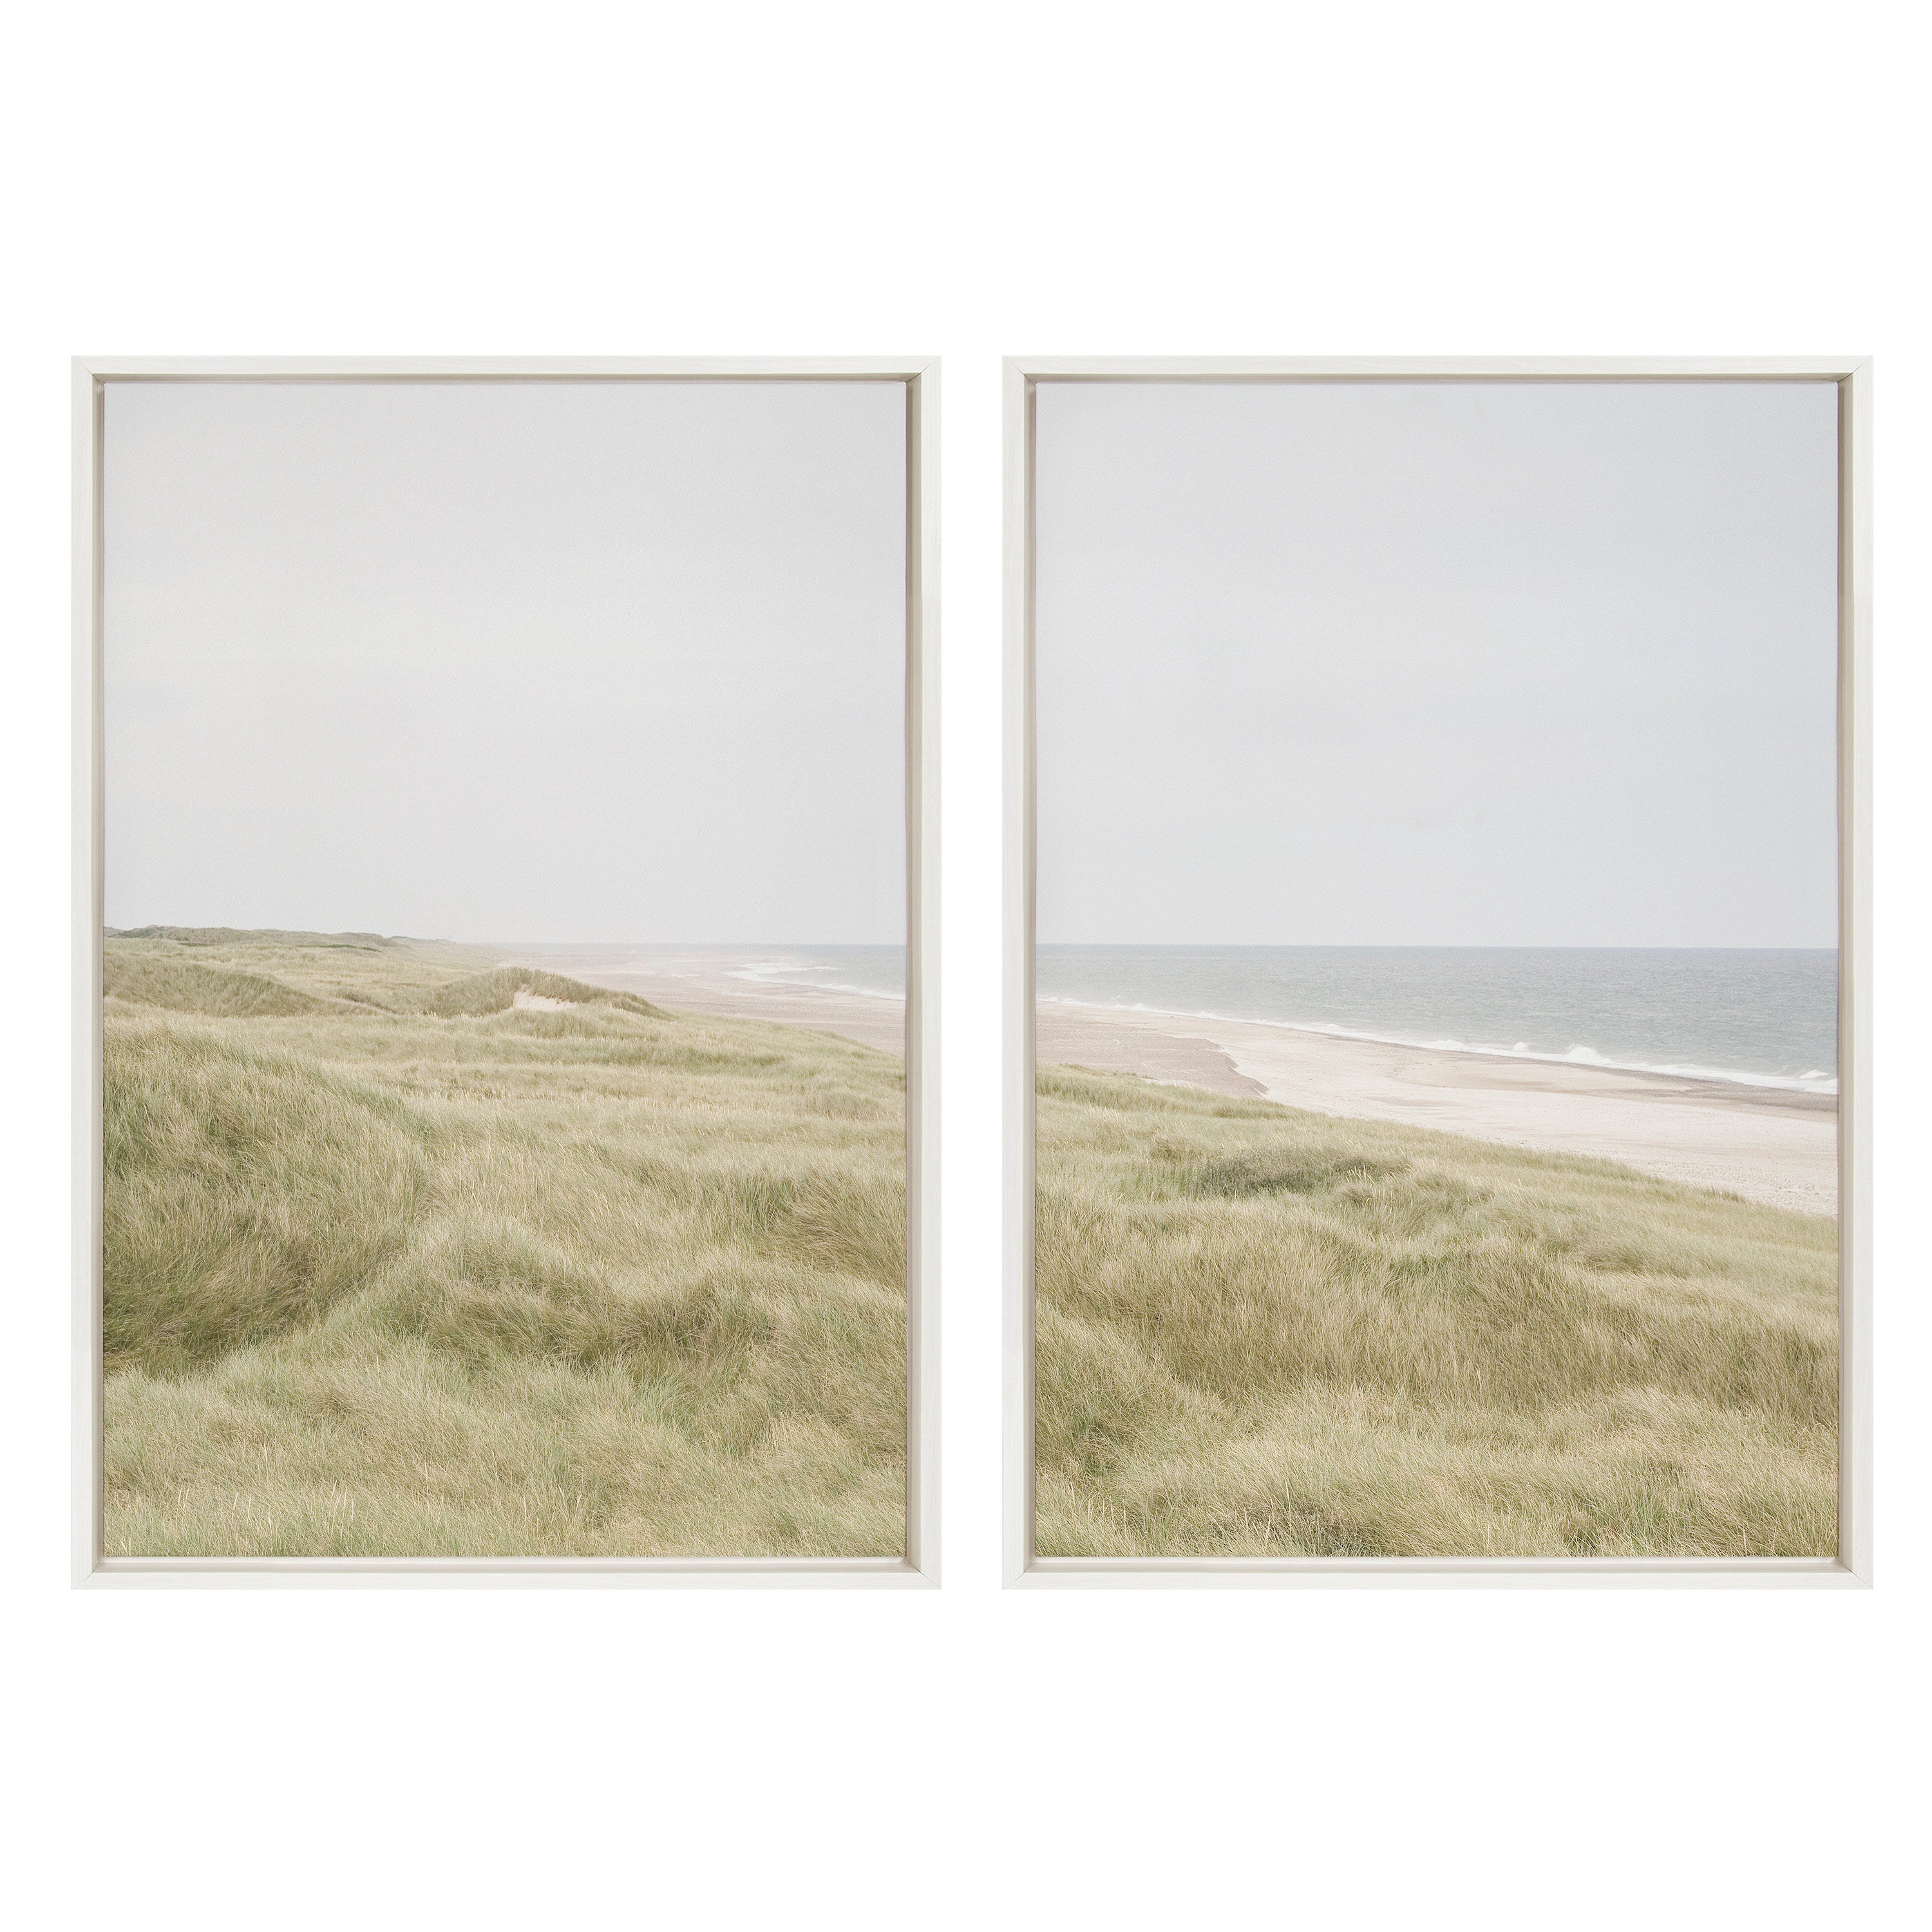 Sylvie Peaceful and Serene Coastal Landscape Left and Right Framed Canvas Art Set by The Creative Bunch Studio